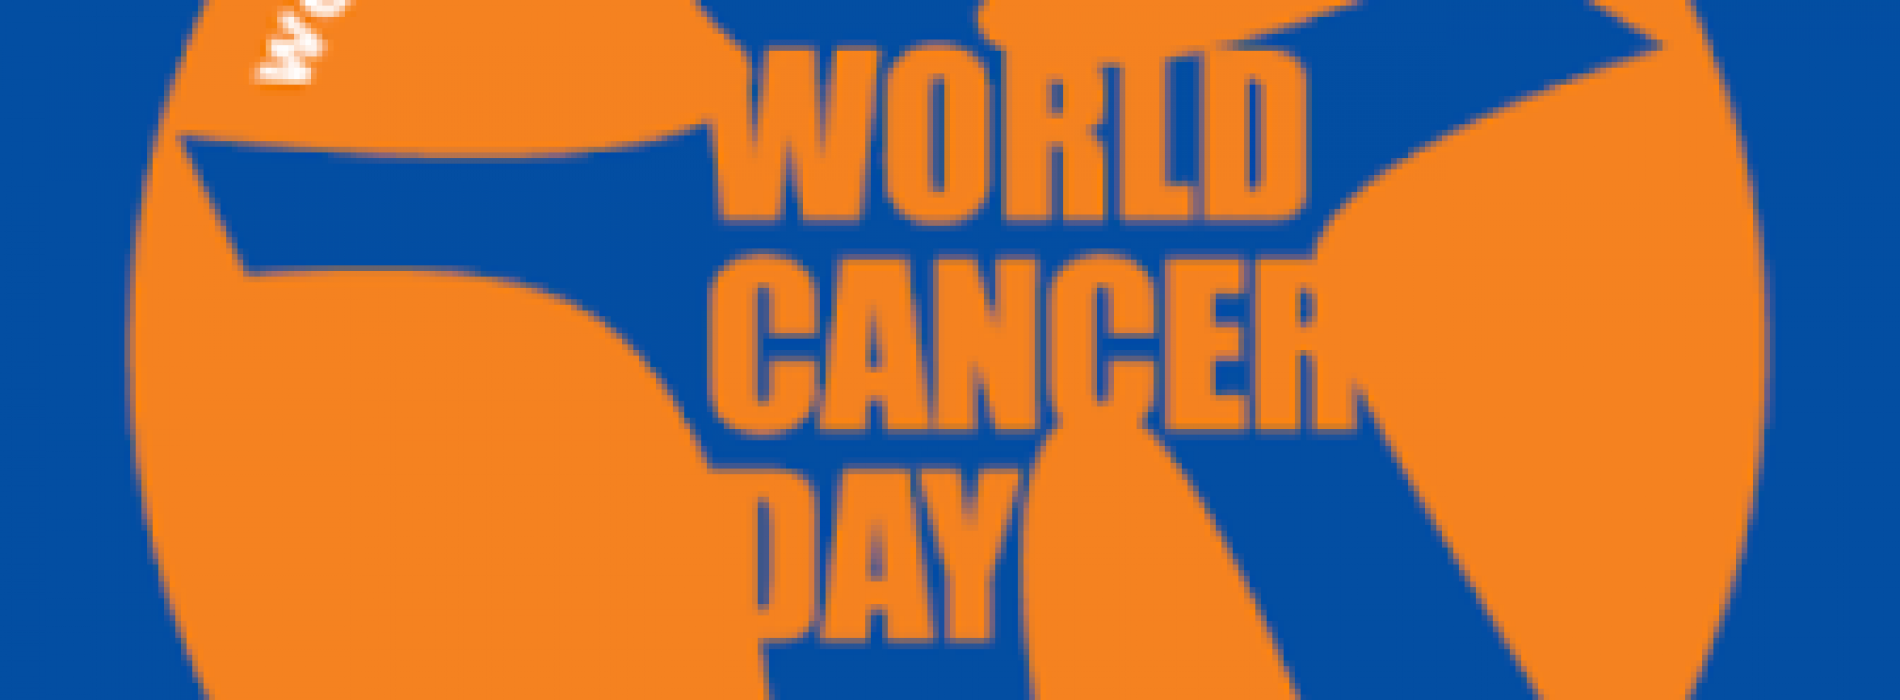 World Cancer Day: For Nigeria, Ignorance remains obstacle to control